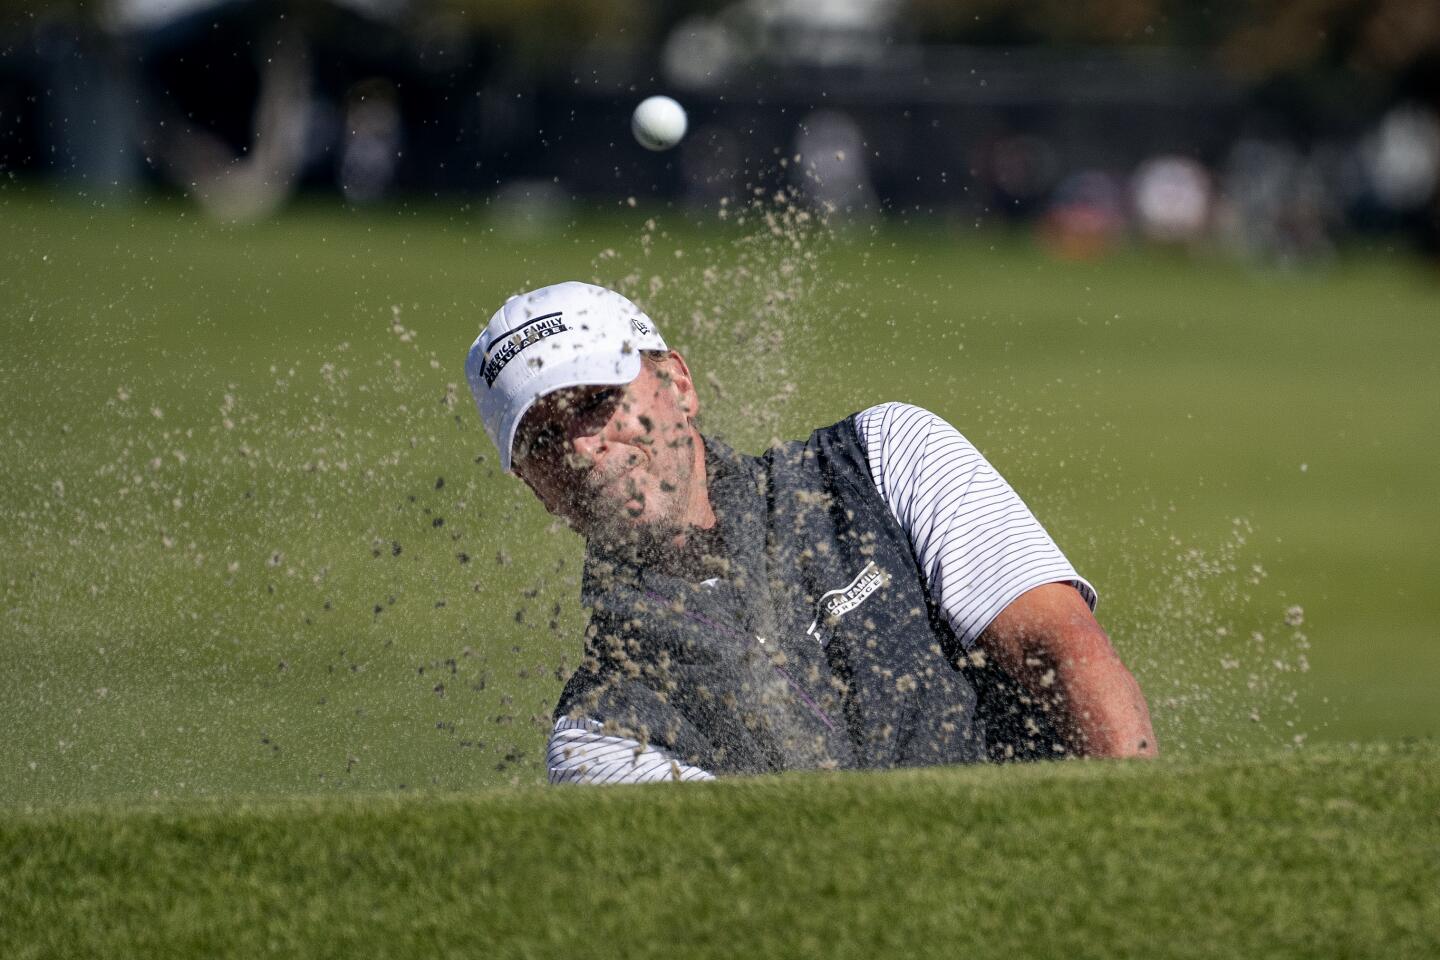 Steve Stricker hits out of the bunker on the third hole during the first round of the Genesis Invitational at Riviera Country Club on Feb. 13, 2020.